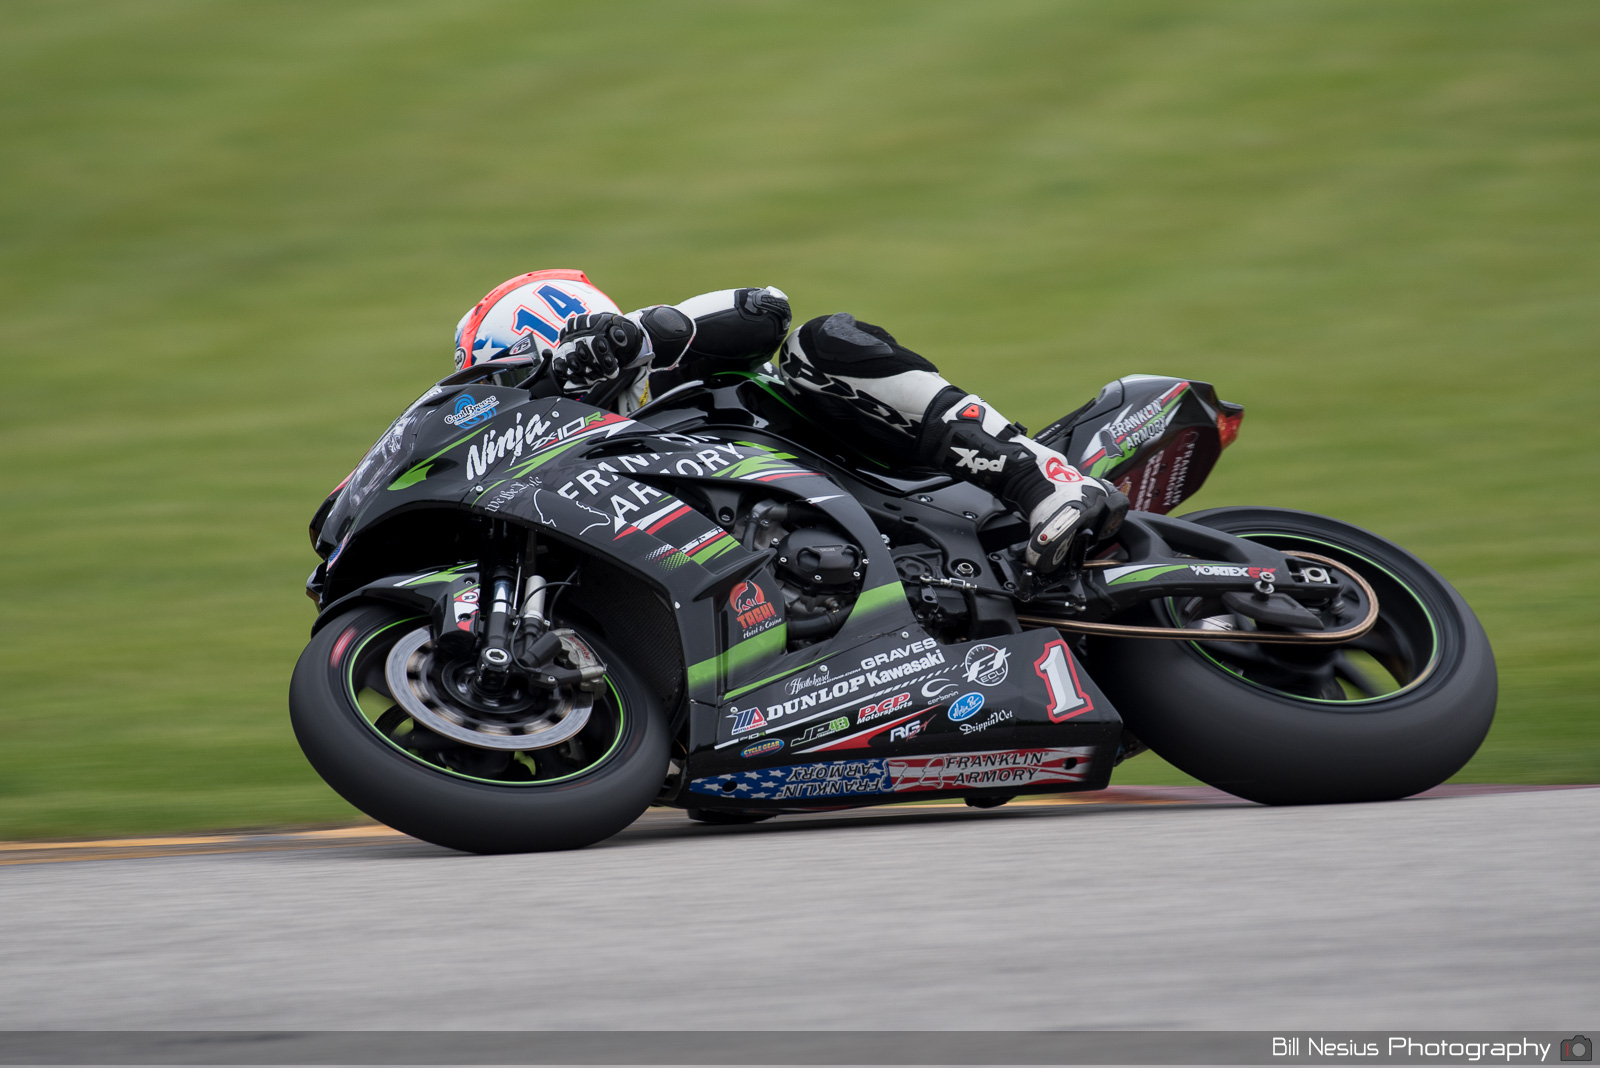 Andrew Lee on the Number 1 Franklin Armory Kawasaki ZX-10R / DSC_1344 / 5